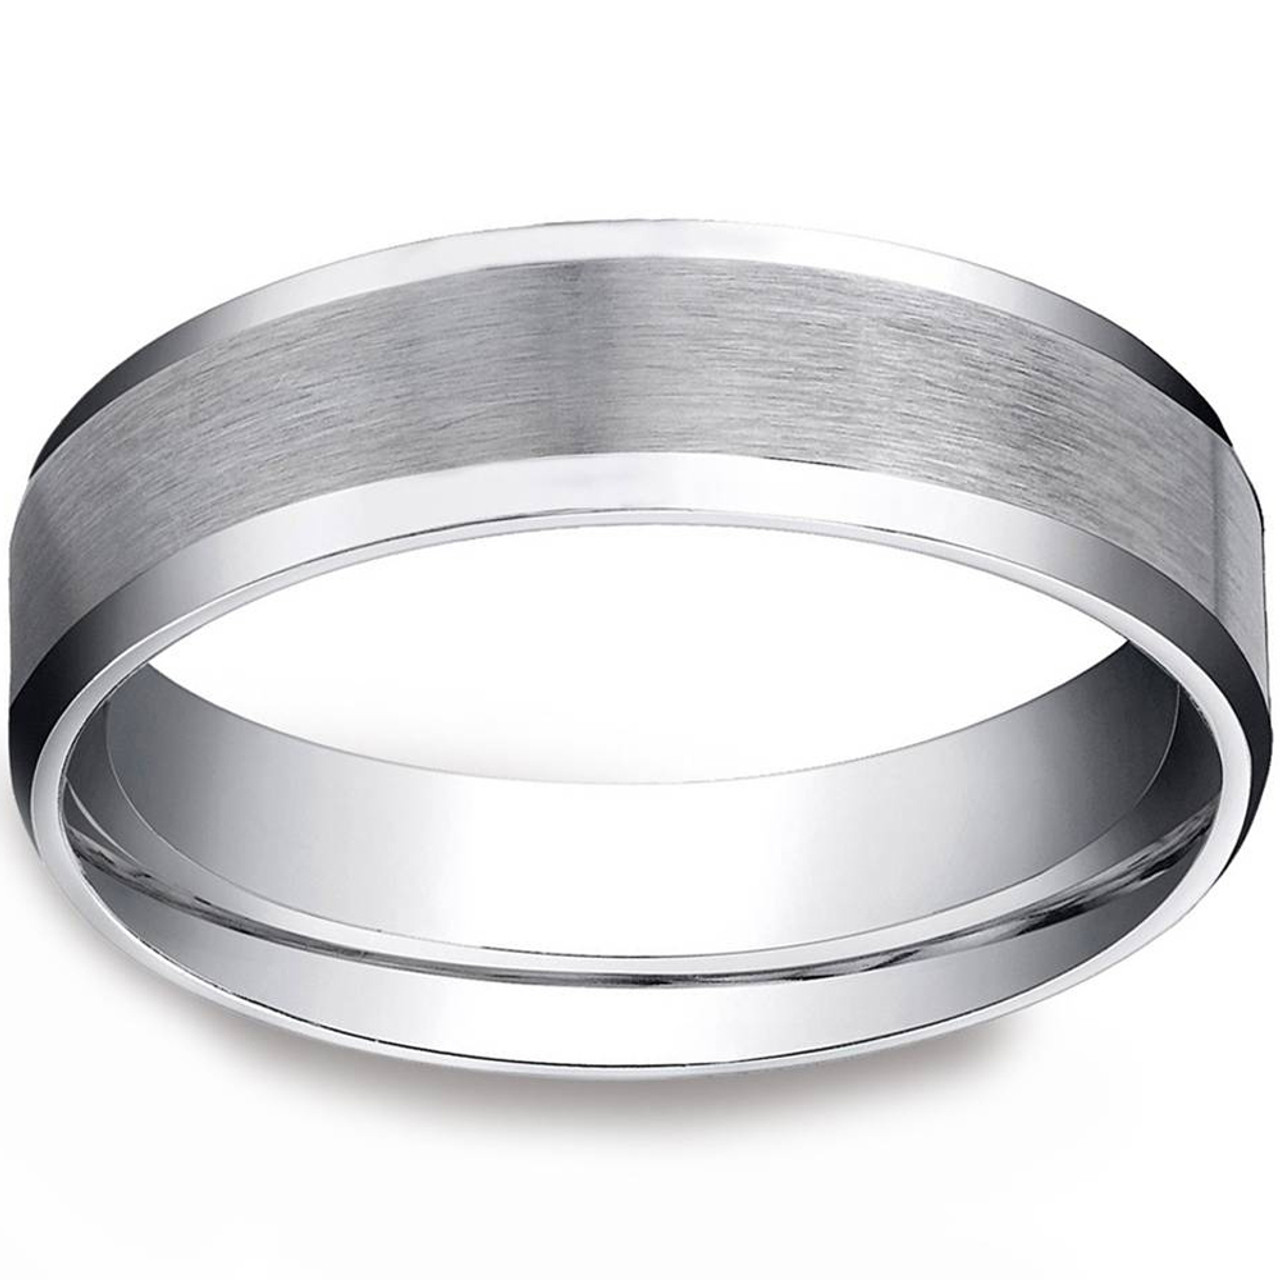 Plain Wedding Band for Women in 18ct White Gold, medium weight,  mill-grained, with a polished/brushed finish